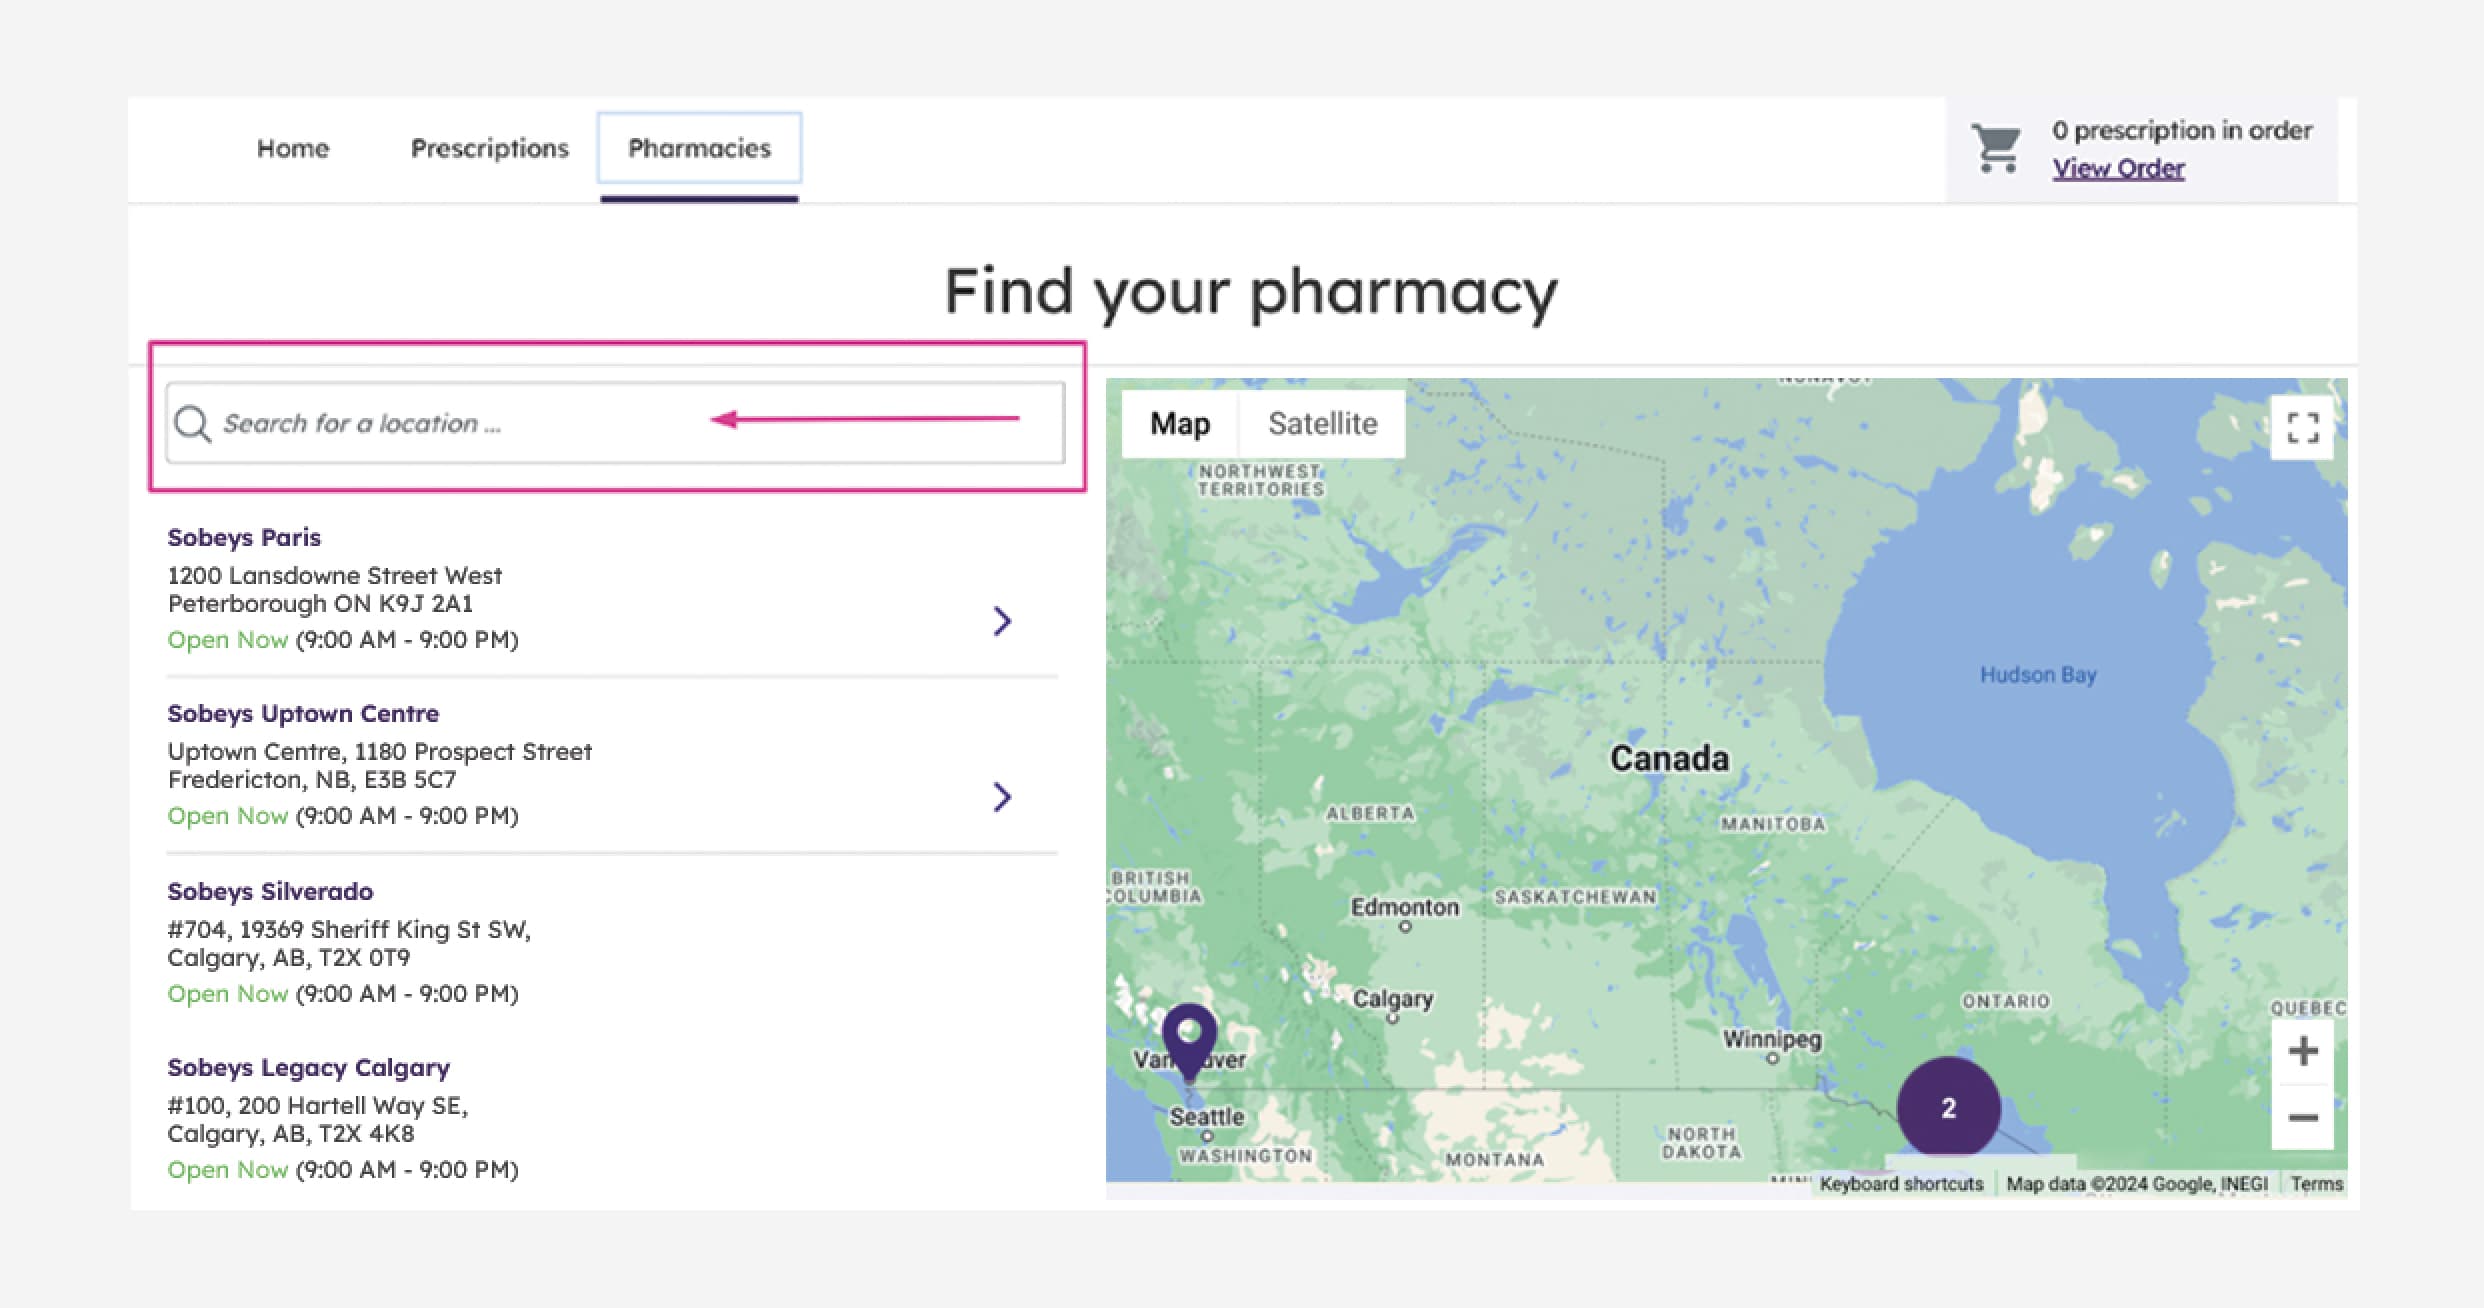 An image showing the process of finding your pharmacy.